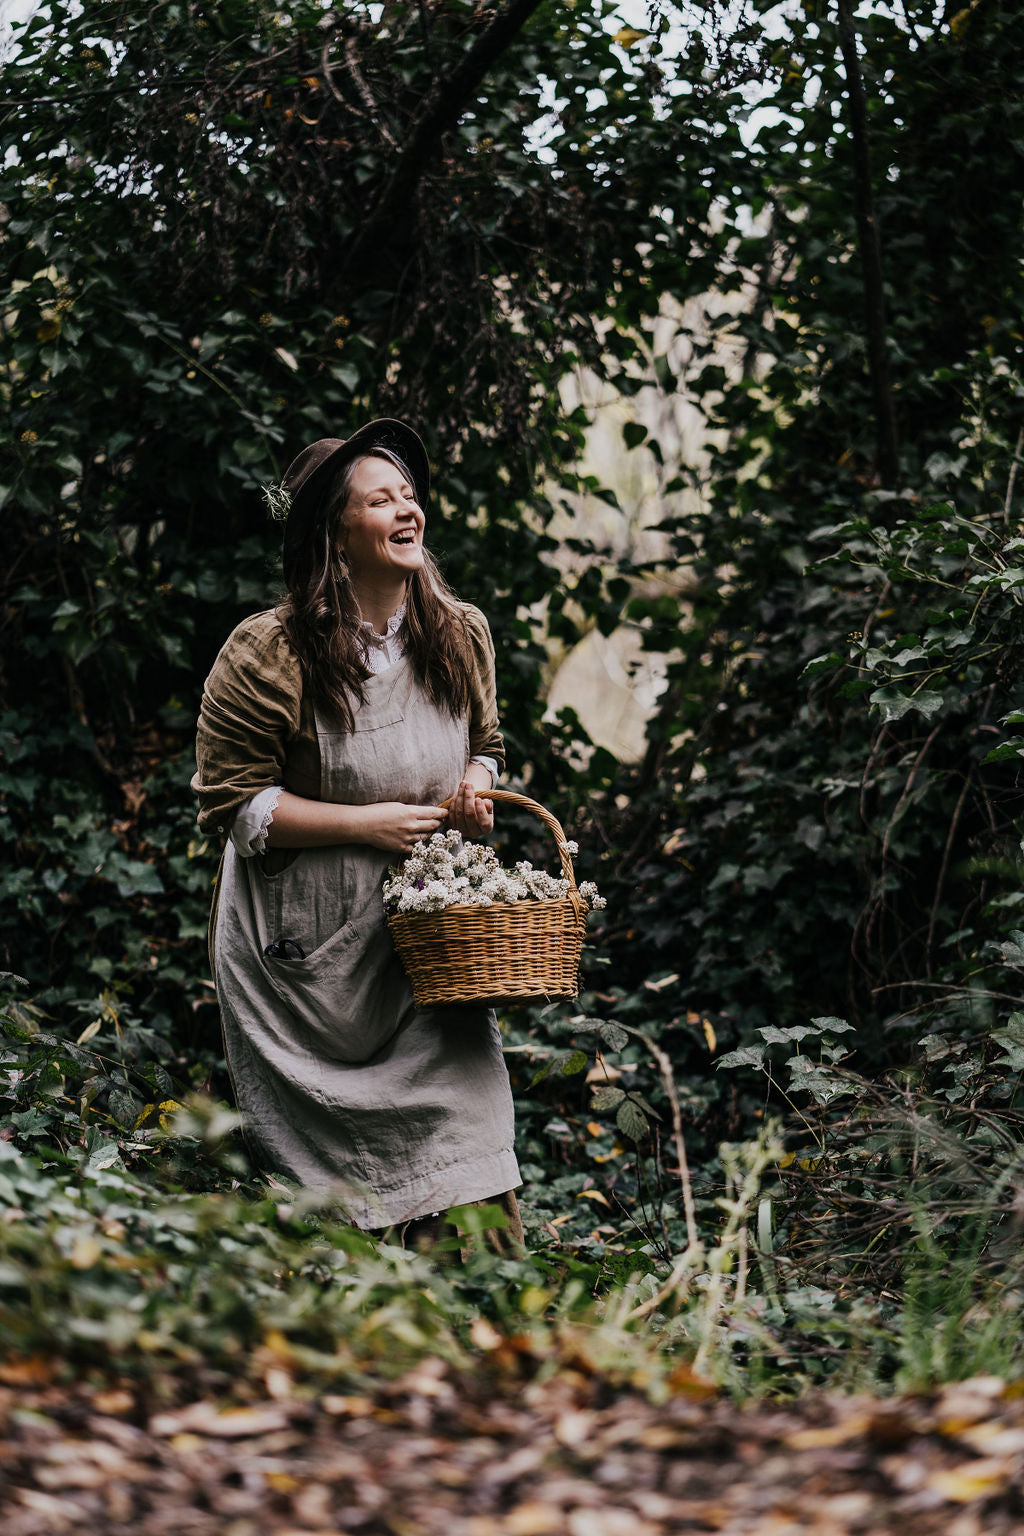 Woman laughing with basket of herbs